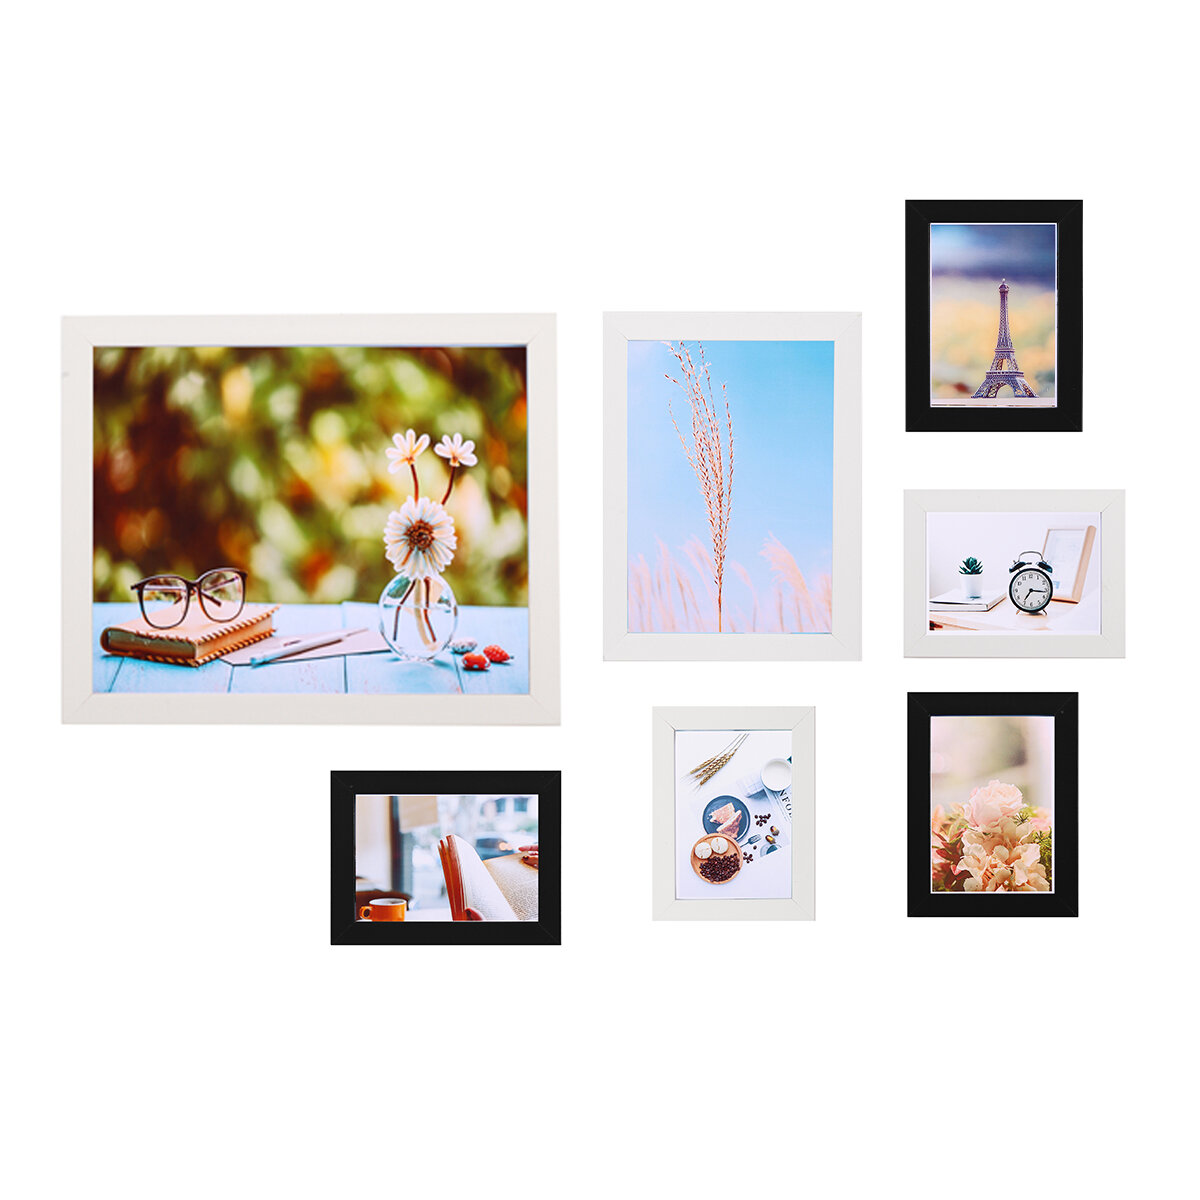 7 Pcs/set Photo Frames 5/7/10-inch Wall Hanging Family Memory Art Picture Photo Home Office Hotel De